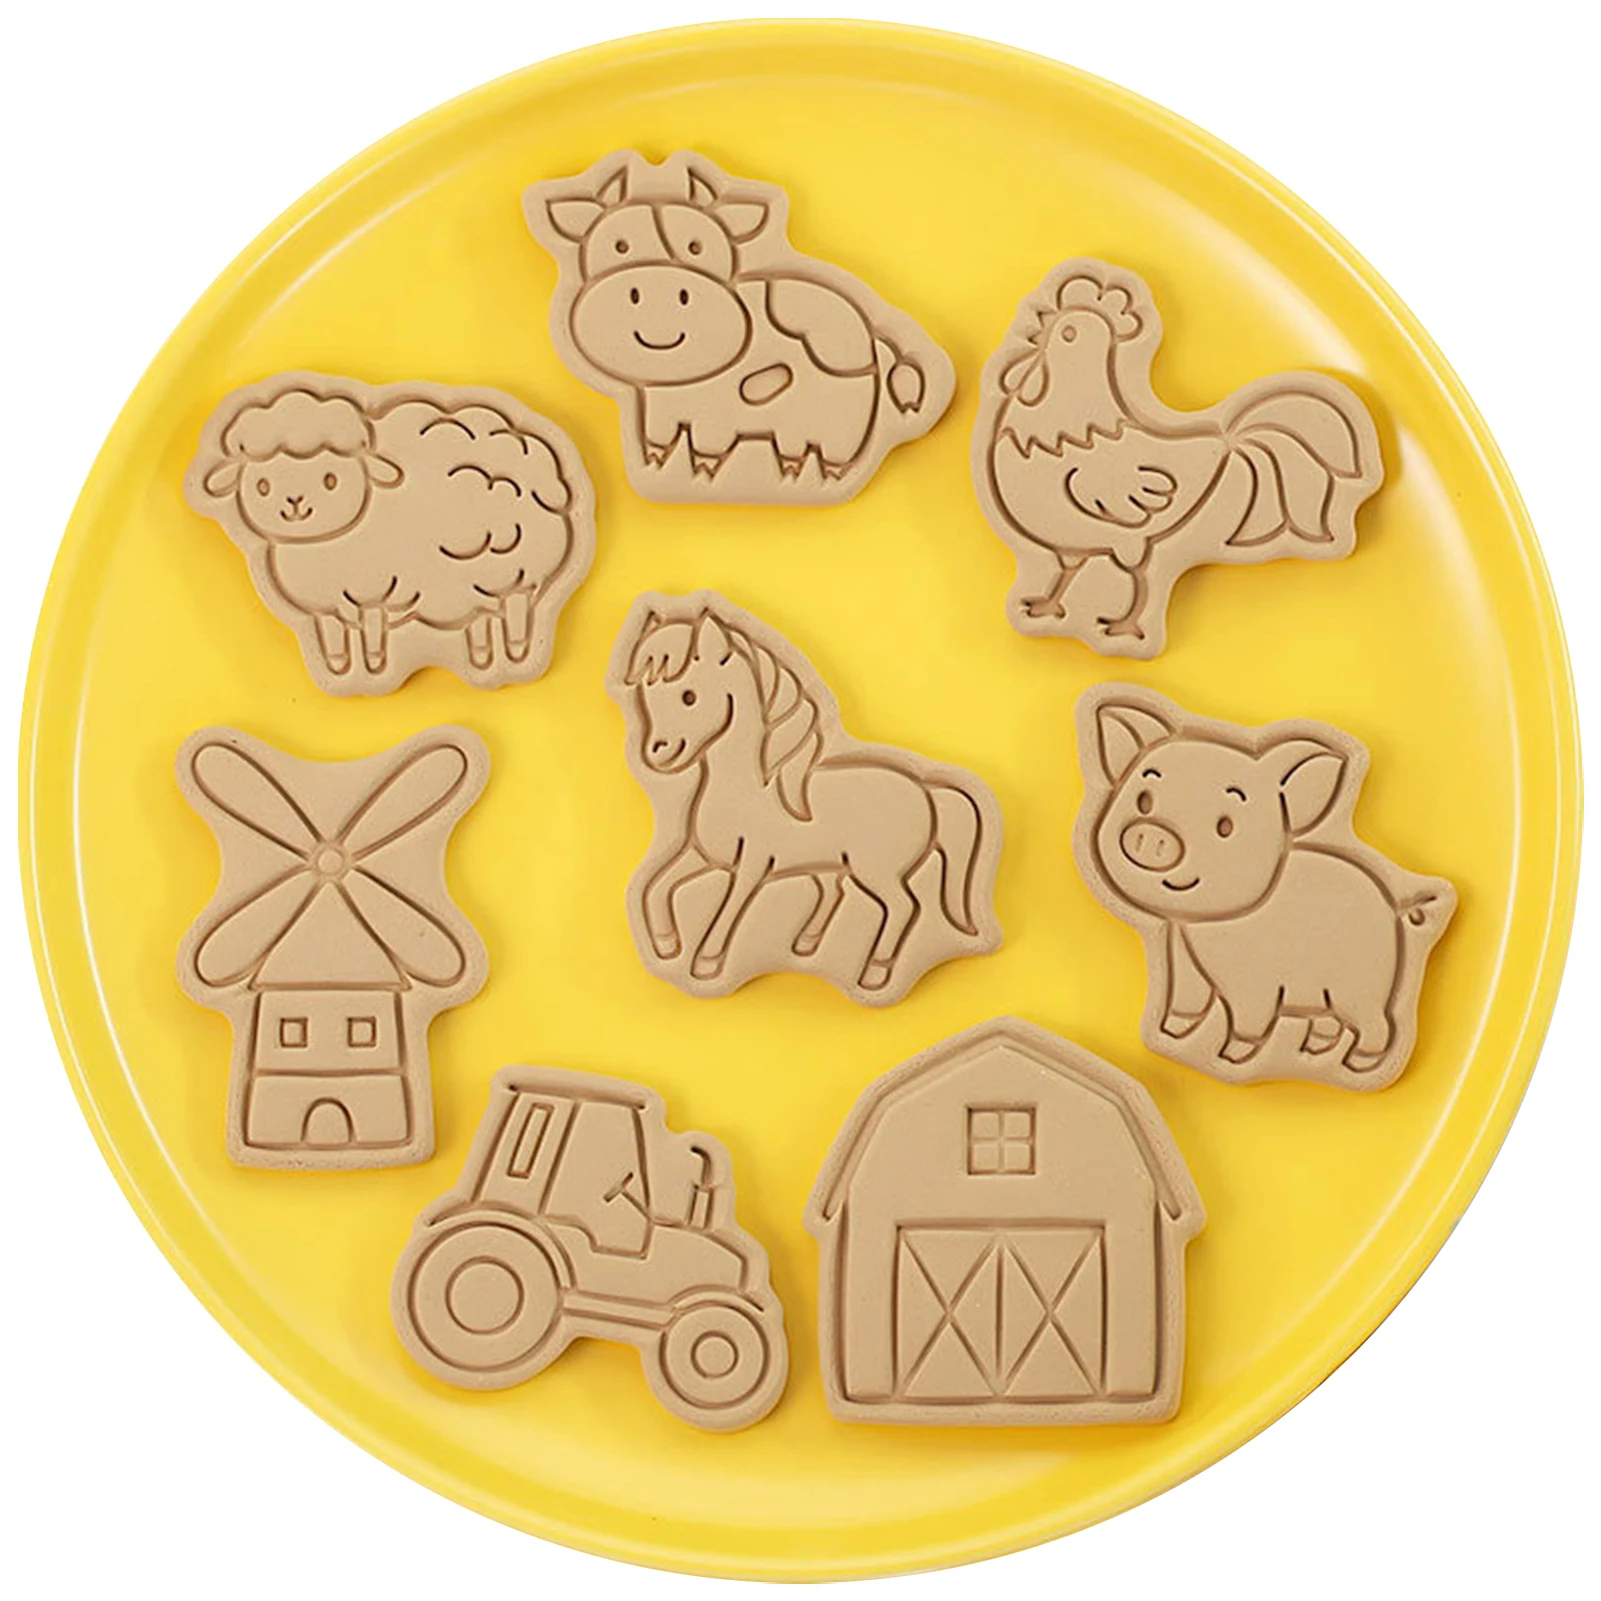 

Cookie Cutter Stamps Farmhouse Style Biscuit Cutters For Baking 8pcs Funny Cartoon Cookie Stamps Embossing Cutters For Biscuit